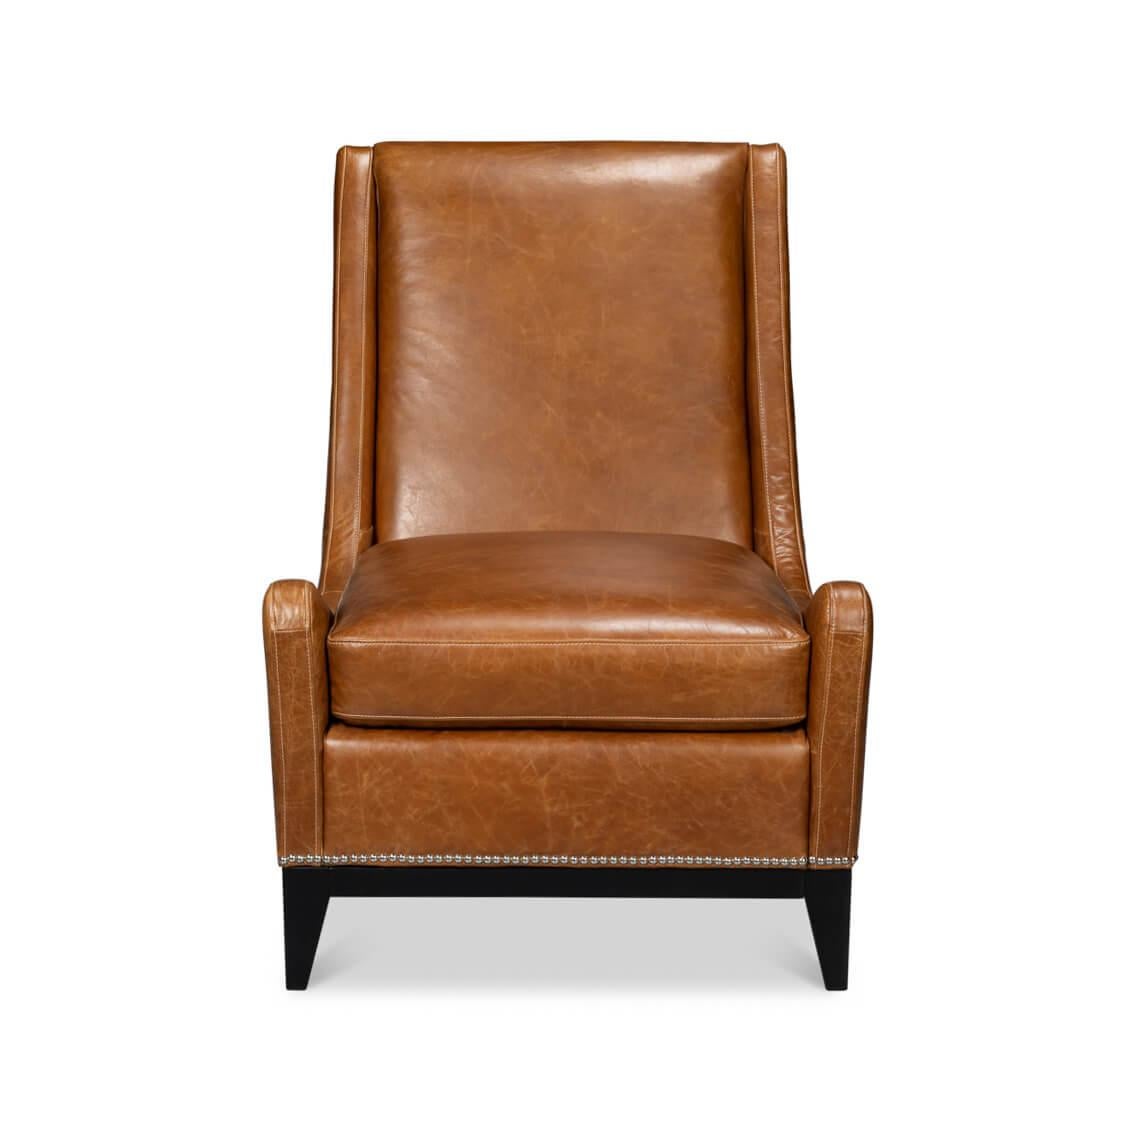 Crafted with meticulous attention to detail, this chair features a supple top-grain leather that beckons you to sit and unwind. The warm, rich Cuba Brown leather is beautifully complemented by the classic nailhead trim, exuding a sense of luxury and